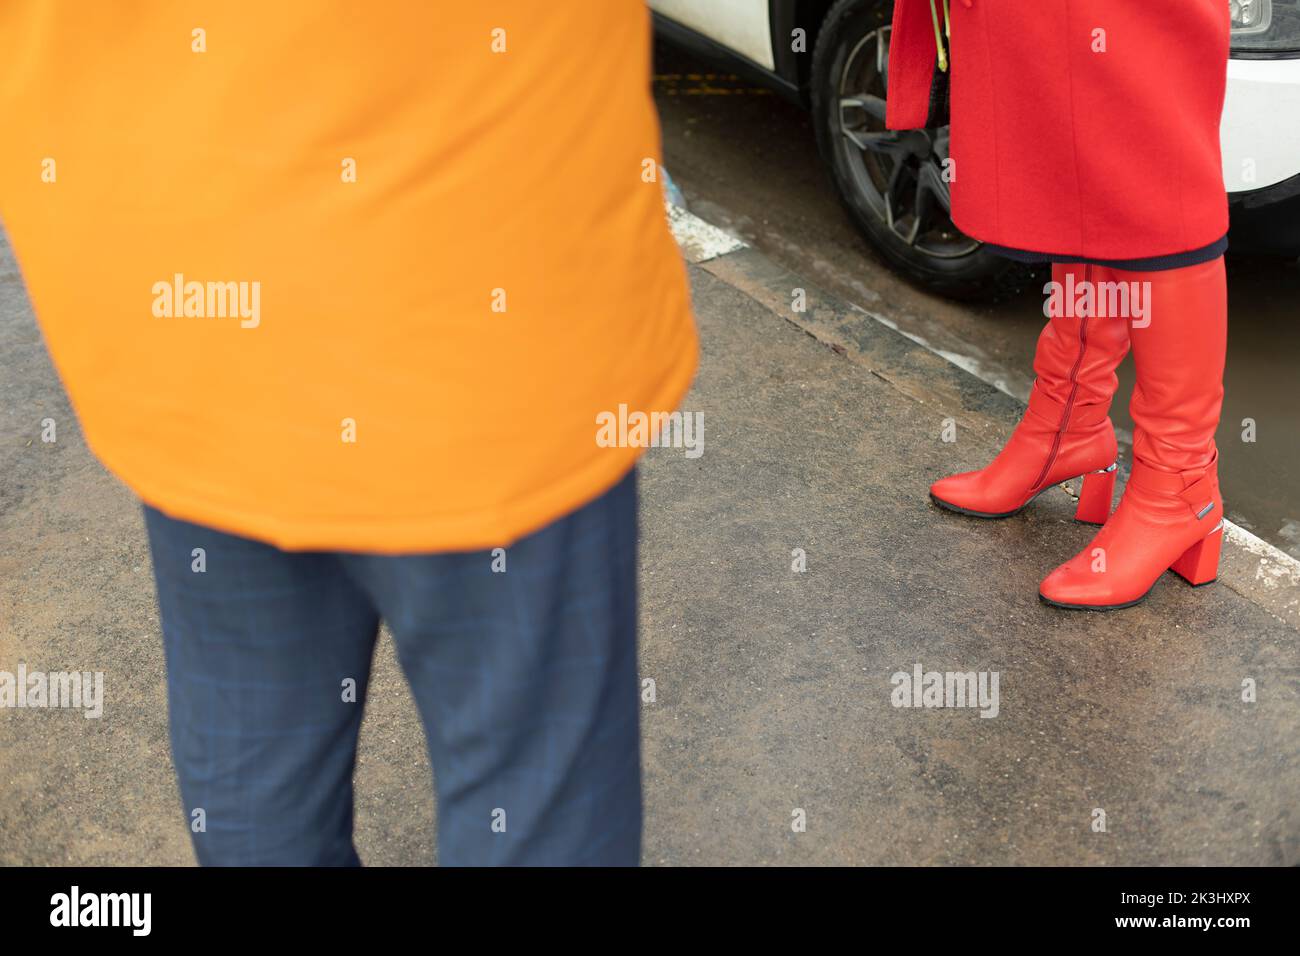 Red boots. Red women's clothing. Meeting people. Romantic mood. Stock Photo